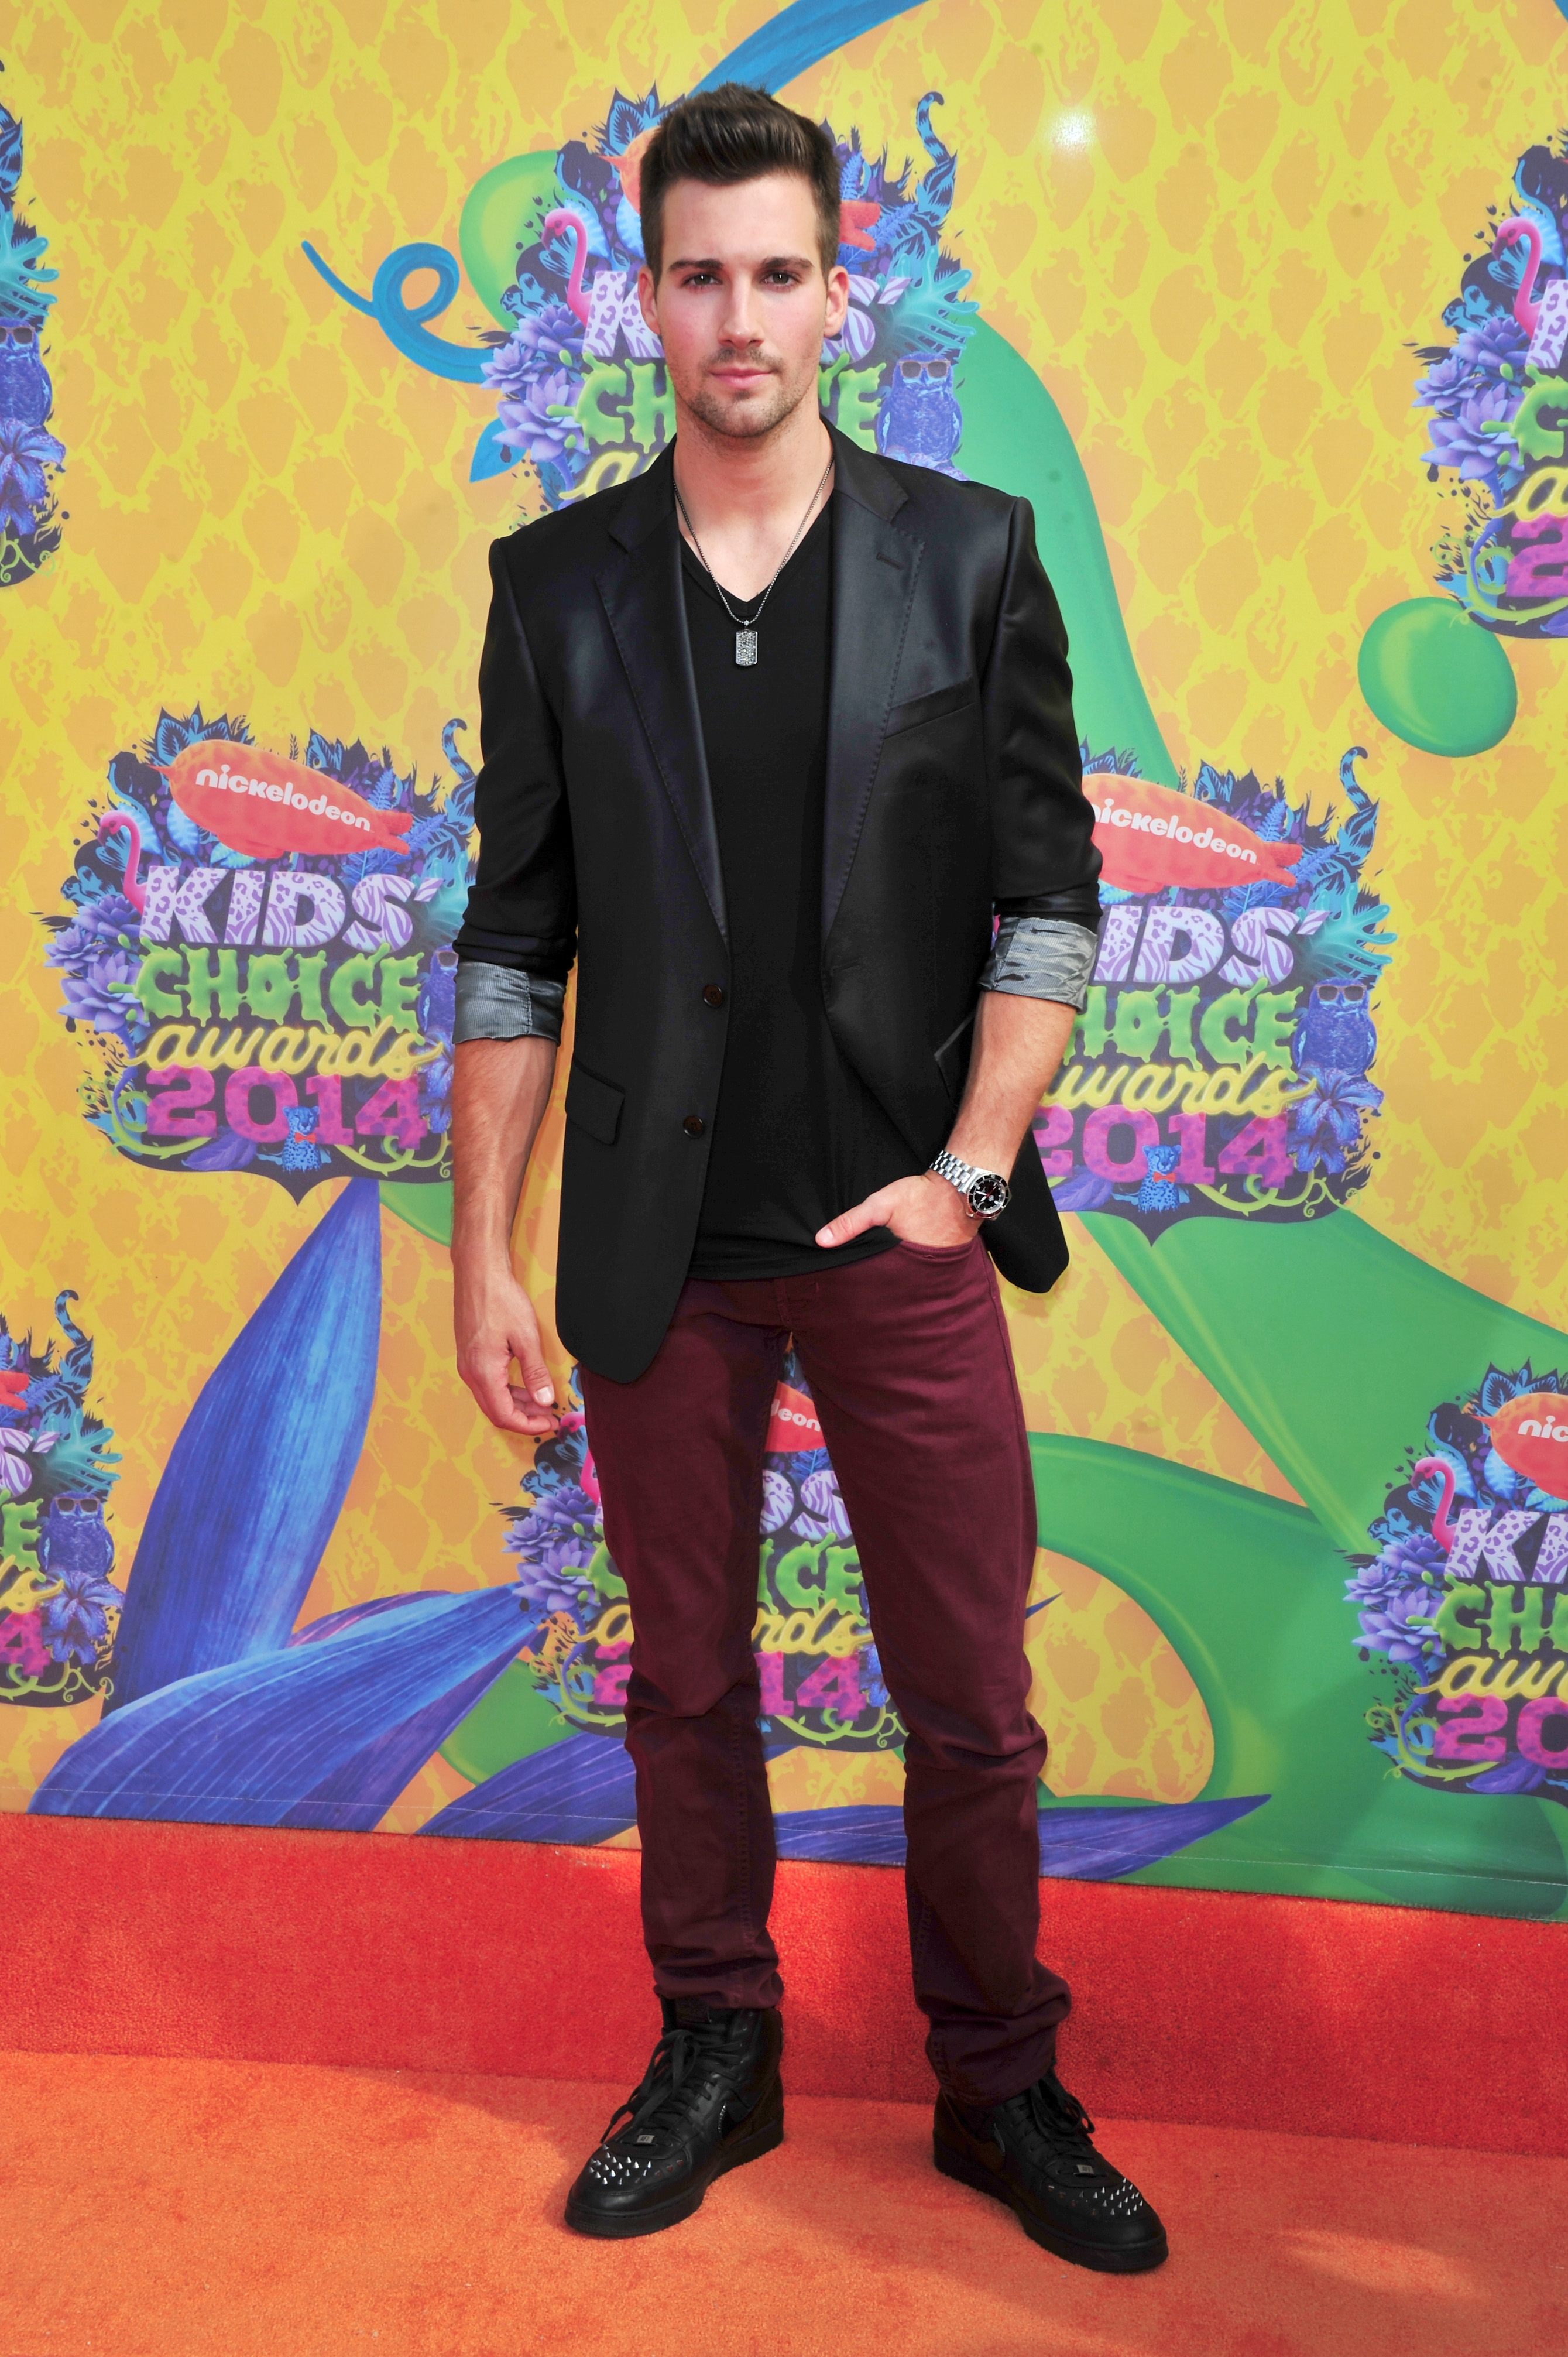 General photo of James Maslow